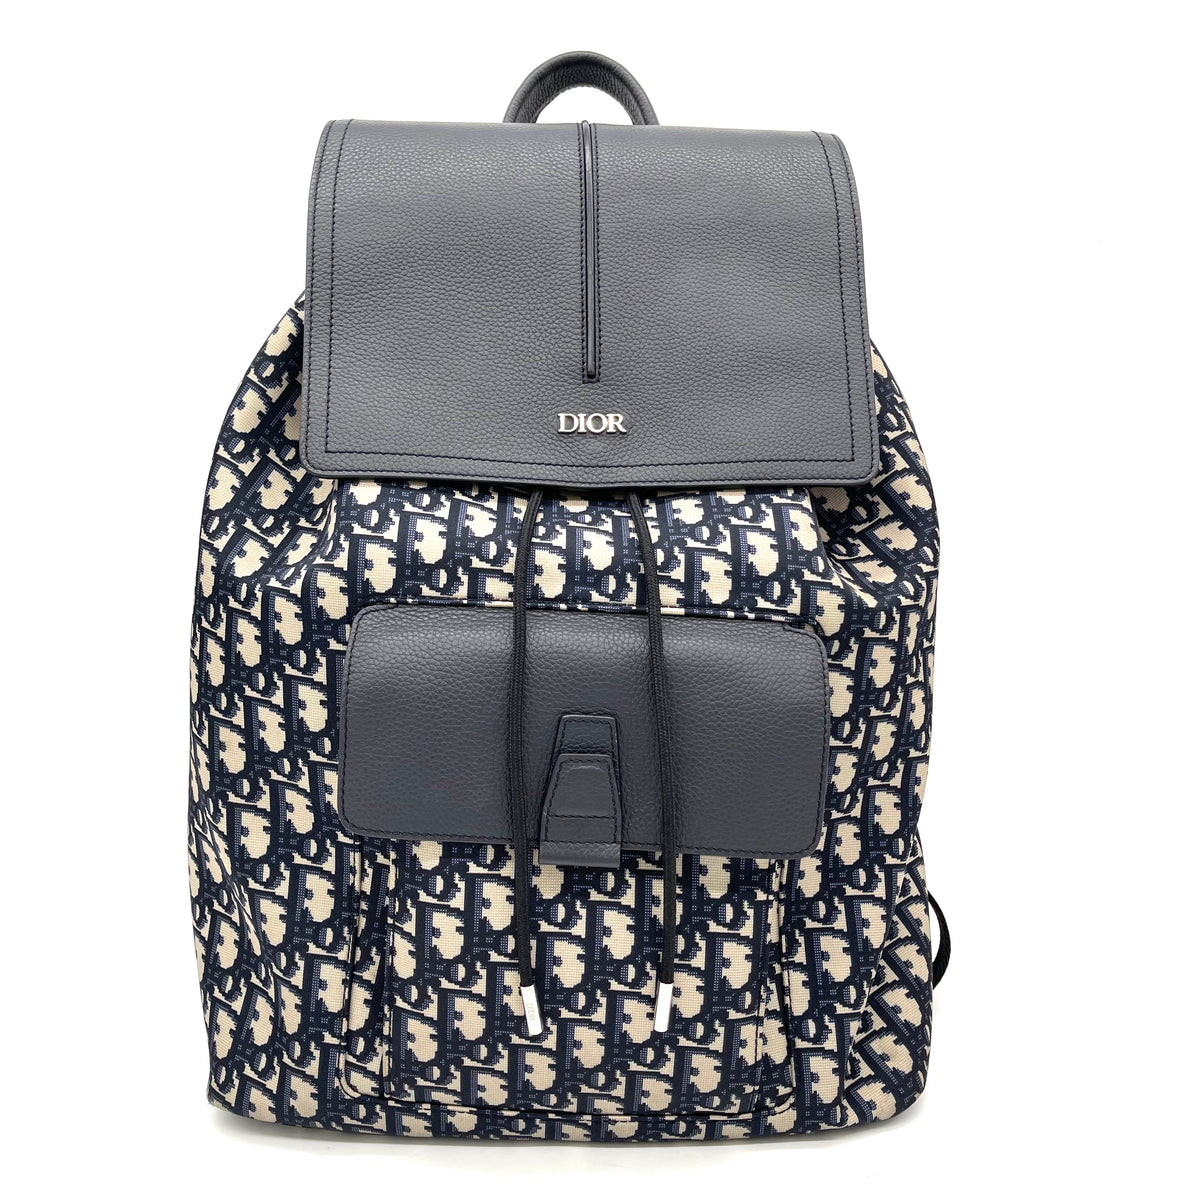 Christian Dior MOTION BACKPACK Beige and Navy Dior Oblique Jacquard and Navy Grained Calfskin Serial #21-BO-1210